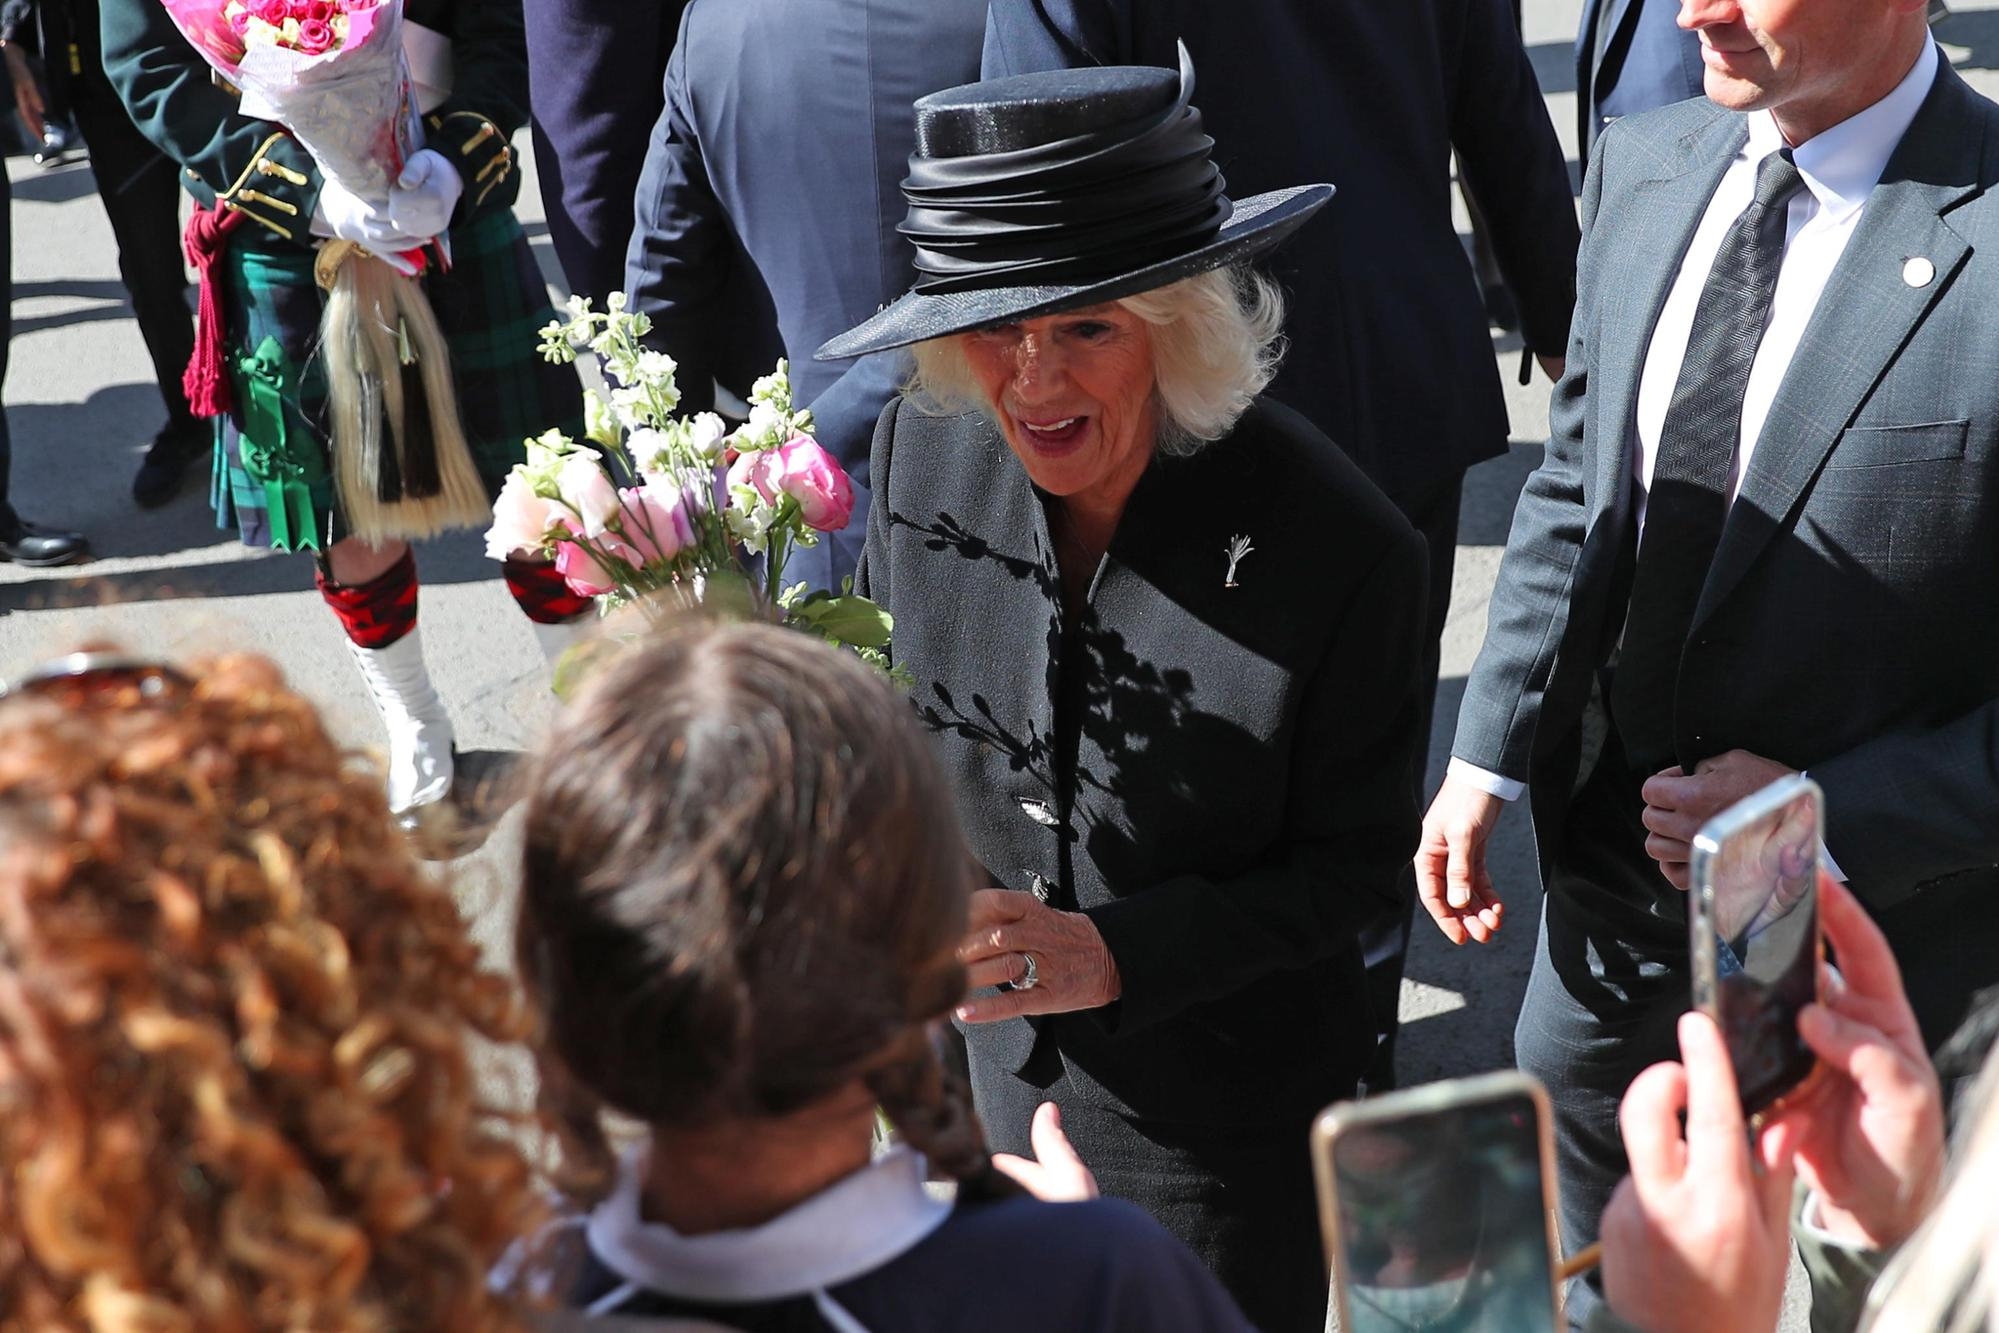 epa10188196 Britain's Queen Consort Camilla greets people as she leaves a memorial service for late Queen Elizabeth II at Llandaff Cathedral in Cardiff, Wales, Britain, 16 September 2022. King Charles visited Wales, ending his first round of visits to the nations of the United Kingdom since he was proclaimed monarch on 10 September. Charles III received condolences from the parliament, government and other authorities of Wales and attended a religious ceremony at Llandaff Cathedral in memory of his mother, Queen Elizabeth II, who died on September 08. EPA/NUNO VEIGA